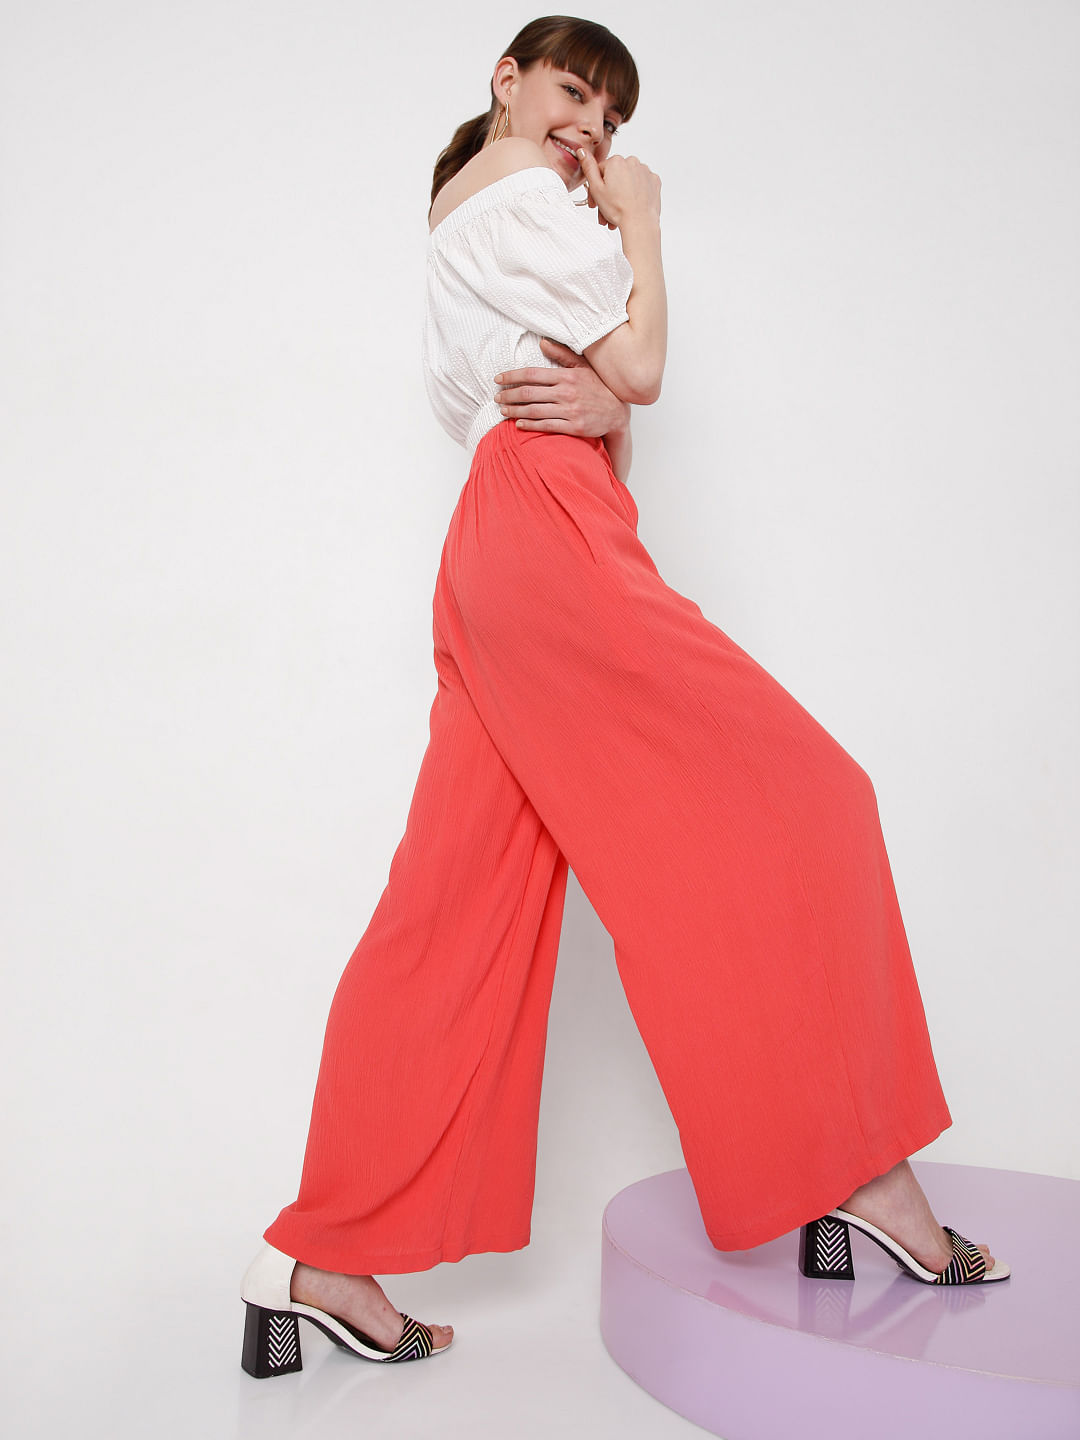 Plus Size Palazzo Pants - Buy Plus Size Palazzo Pants online at Best Prices  in India | Flipkart.com